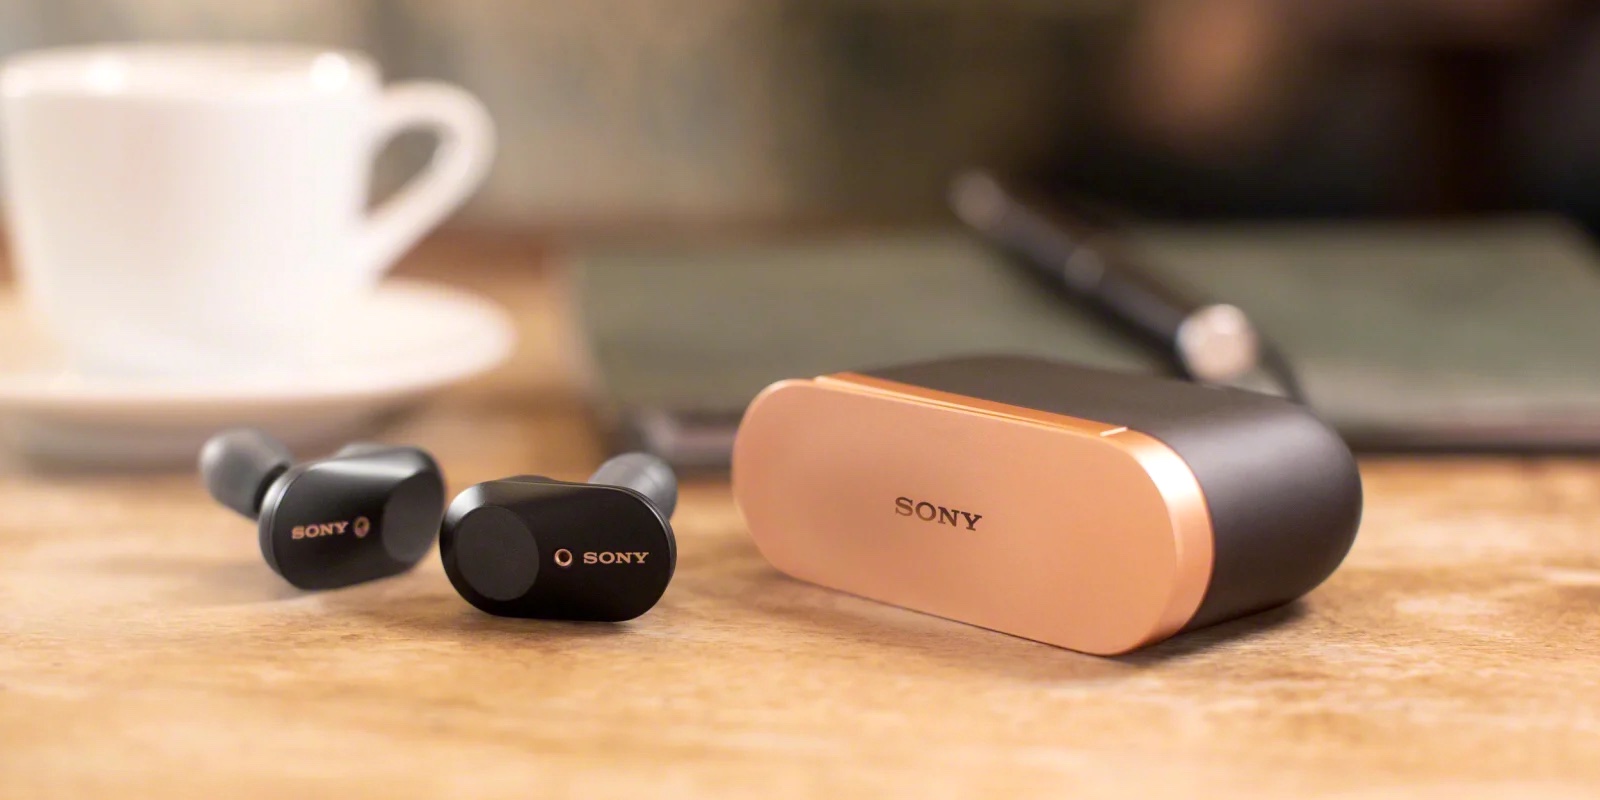 Review: WF-1000XM3 true wireless earbuds the new champs - 9to5Mac